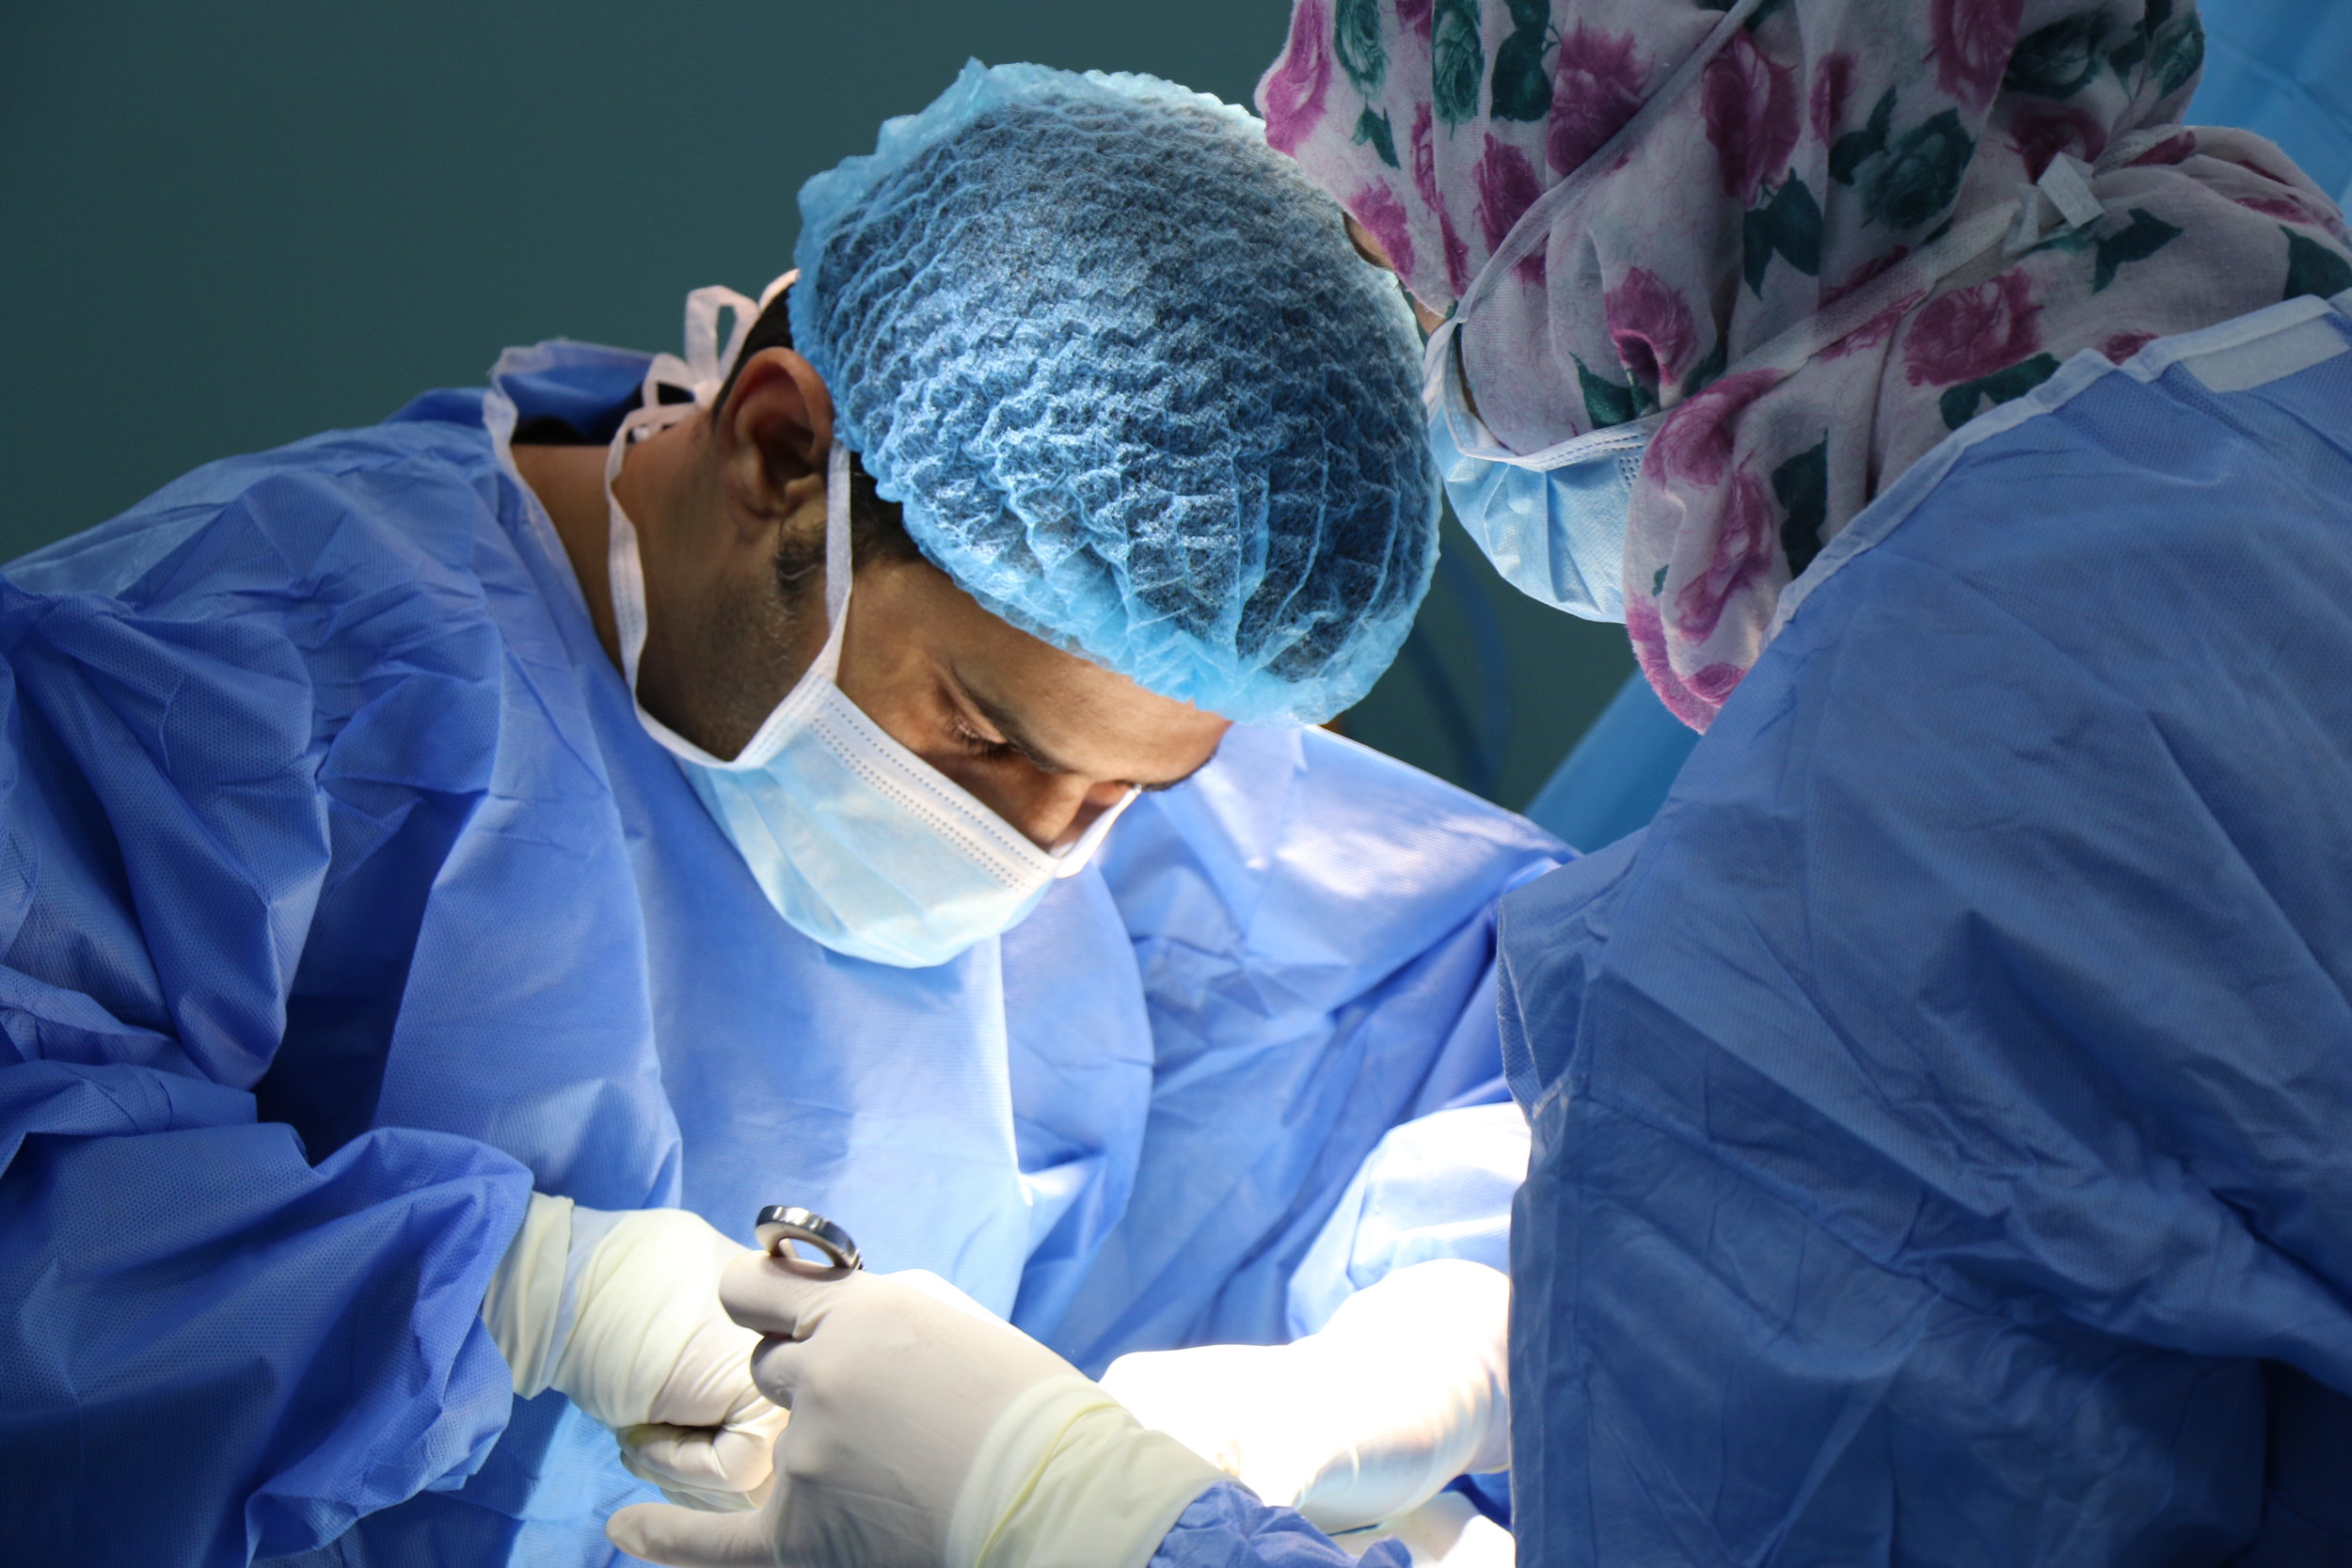 How to Know When It’s Time for Spine Surgery